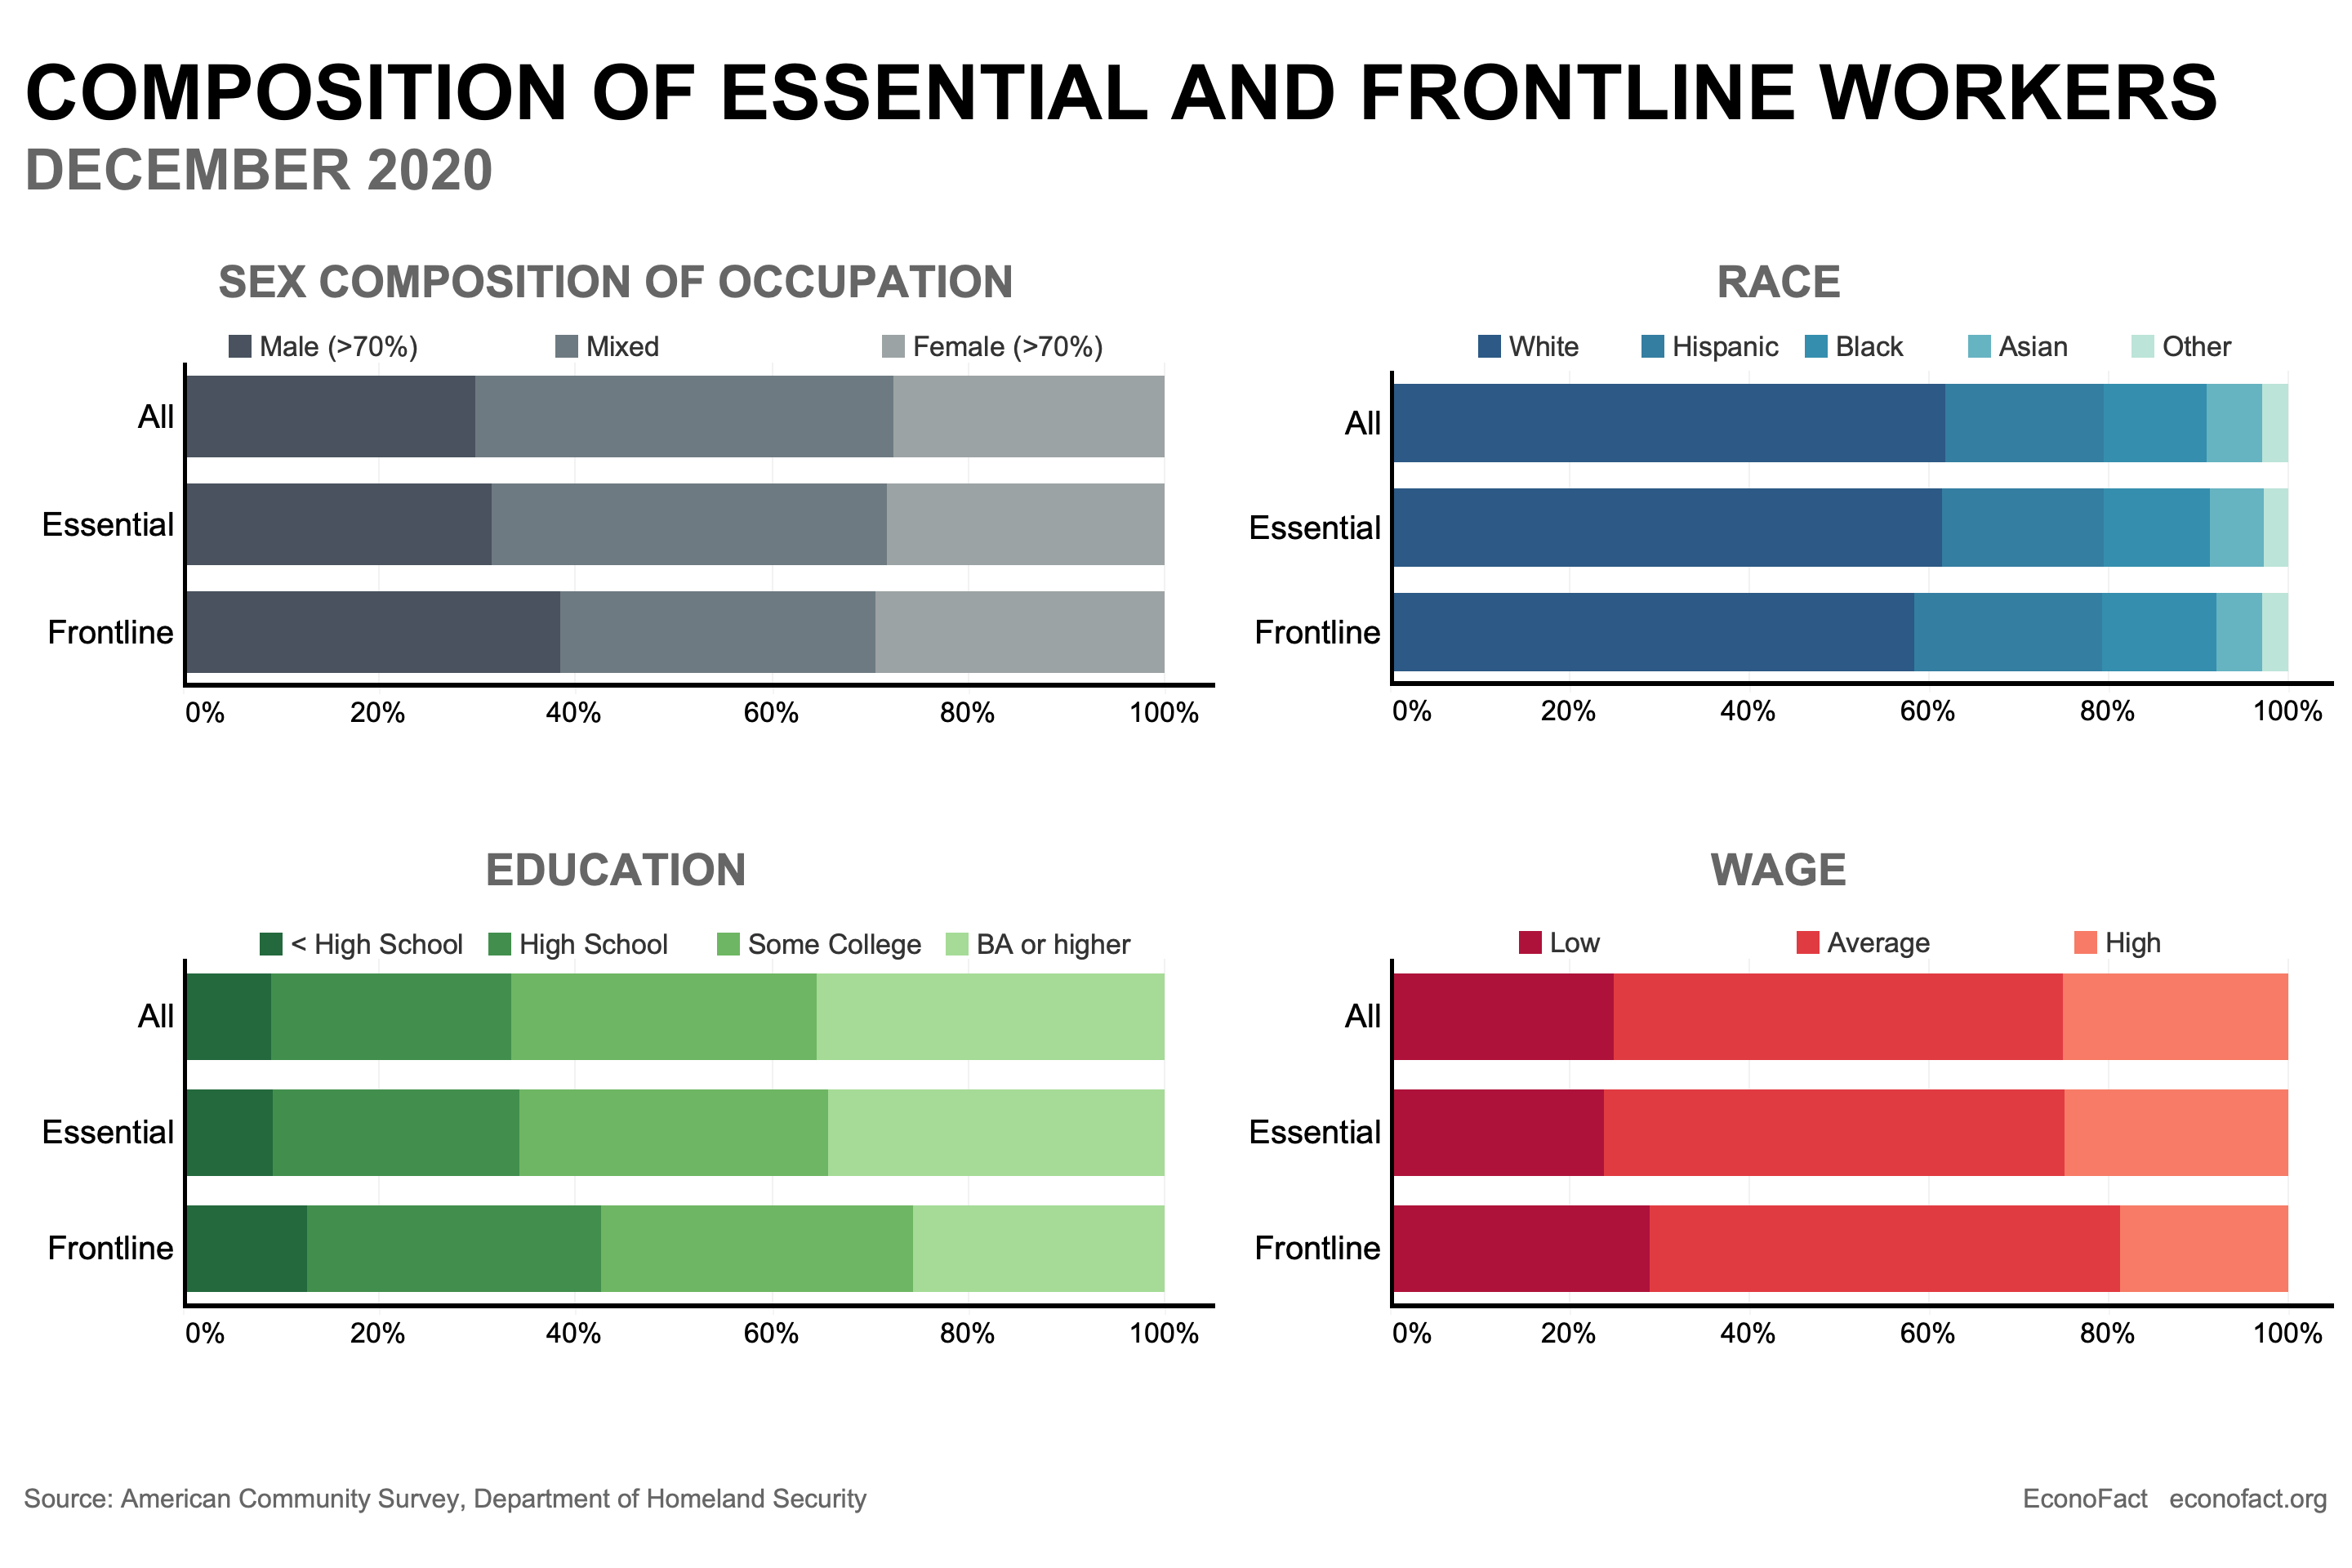 Bar chart compares the composition of essential and frontline workers to the employed population in December of 2020. While the composition of essential workers very closely resembles the general workforce, frontline workers are relatively more likely to be members of a racial minority, have lower levels of education and earn lower wages.